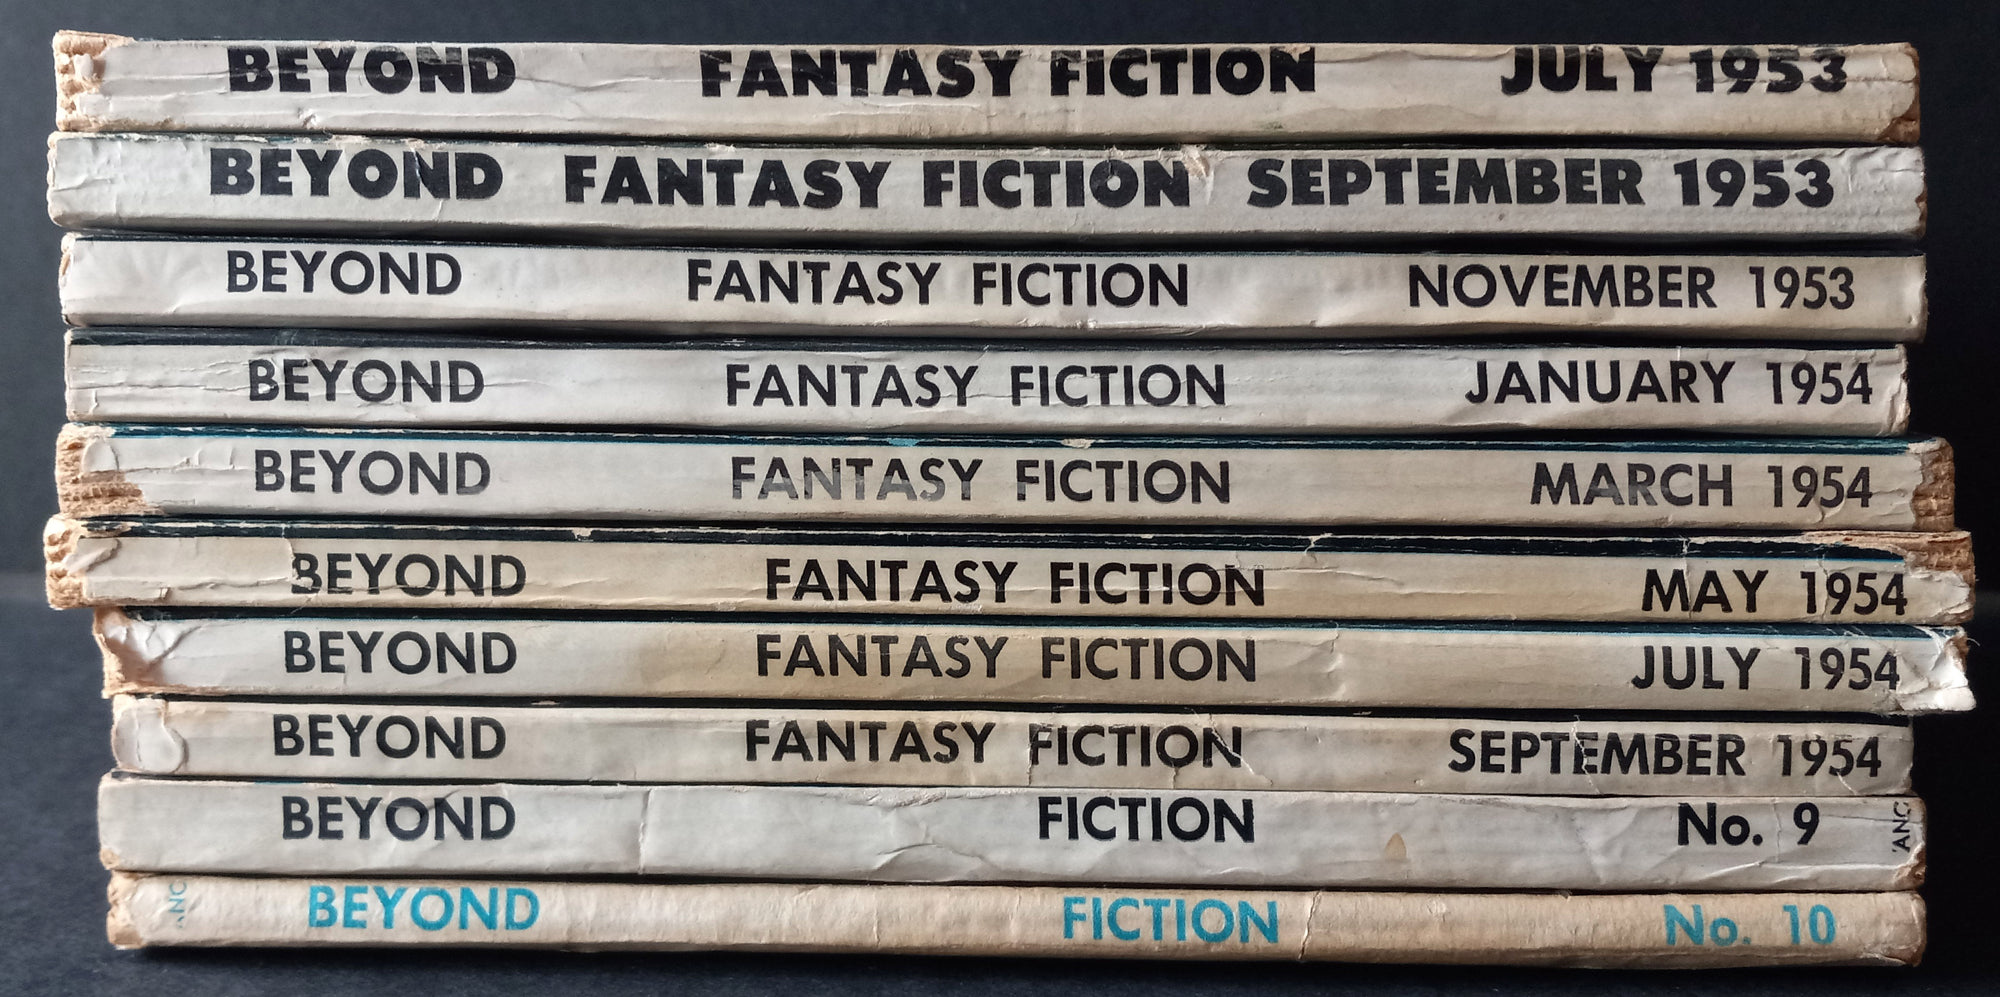 BEYOND FANTASY FICTION: Complete run (10 issues), 1953-1955